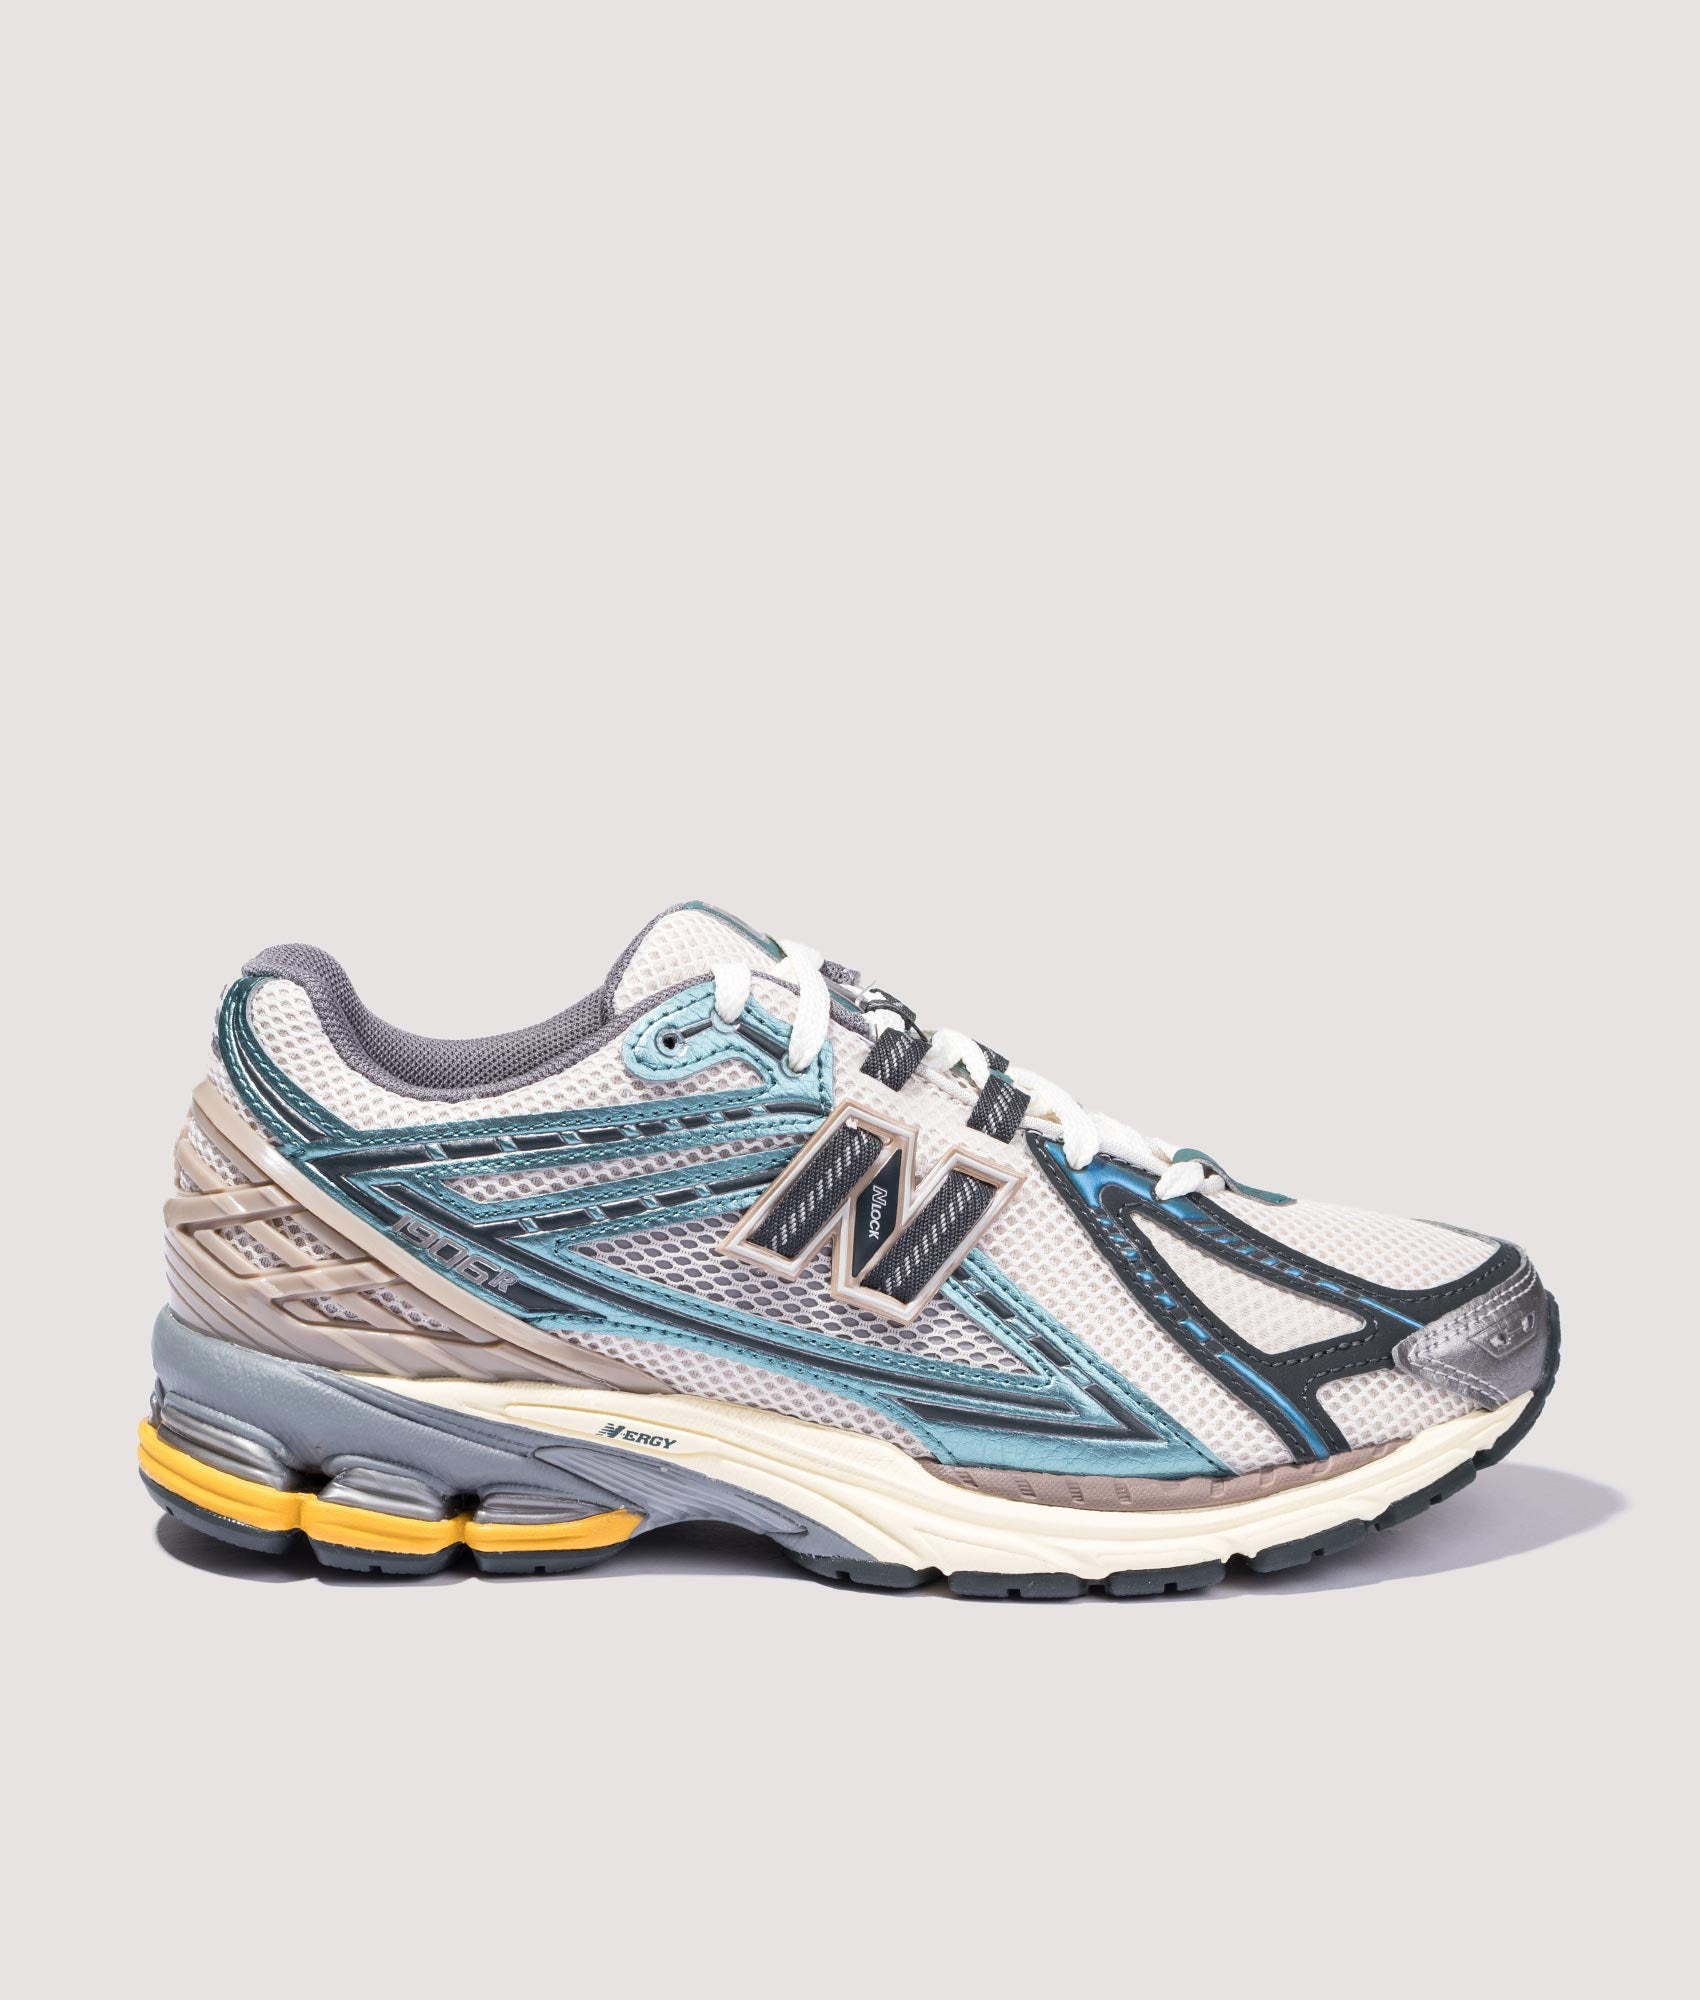 New Balance Mens 1906R Sneakers - Colour: M1906RRC New Spruce/Moonbeam/Driftwood - Size: 8